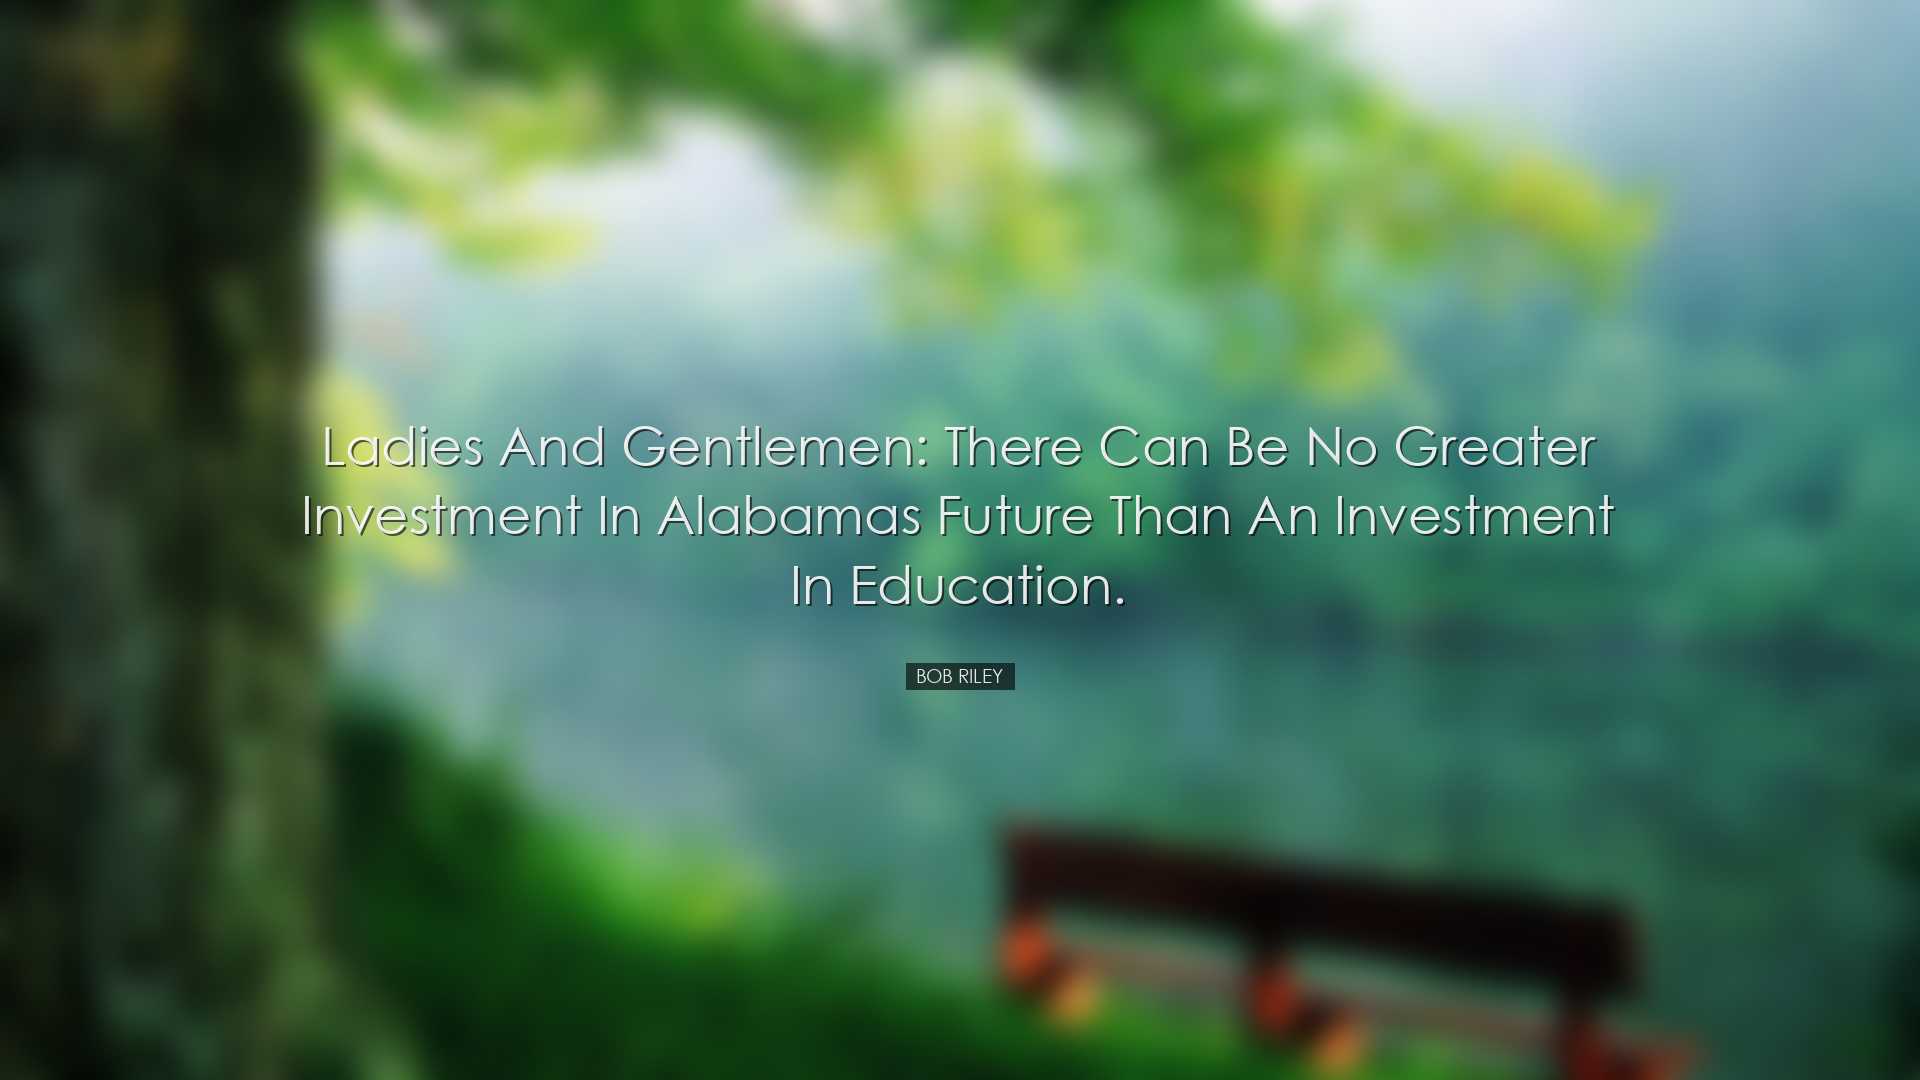 Ladies and gentlemen: There can be no greater investment in Alabam